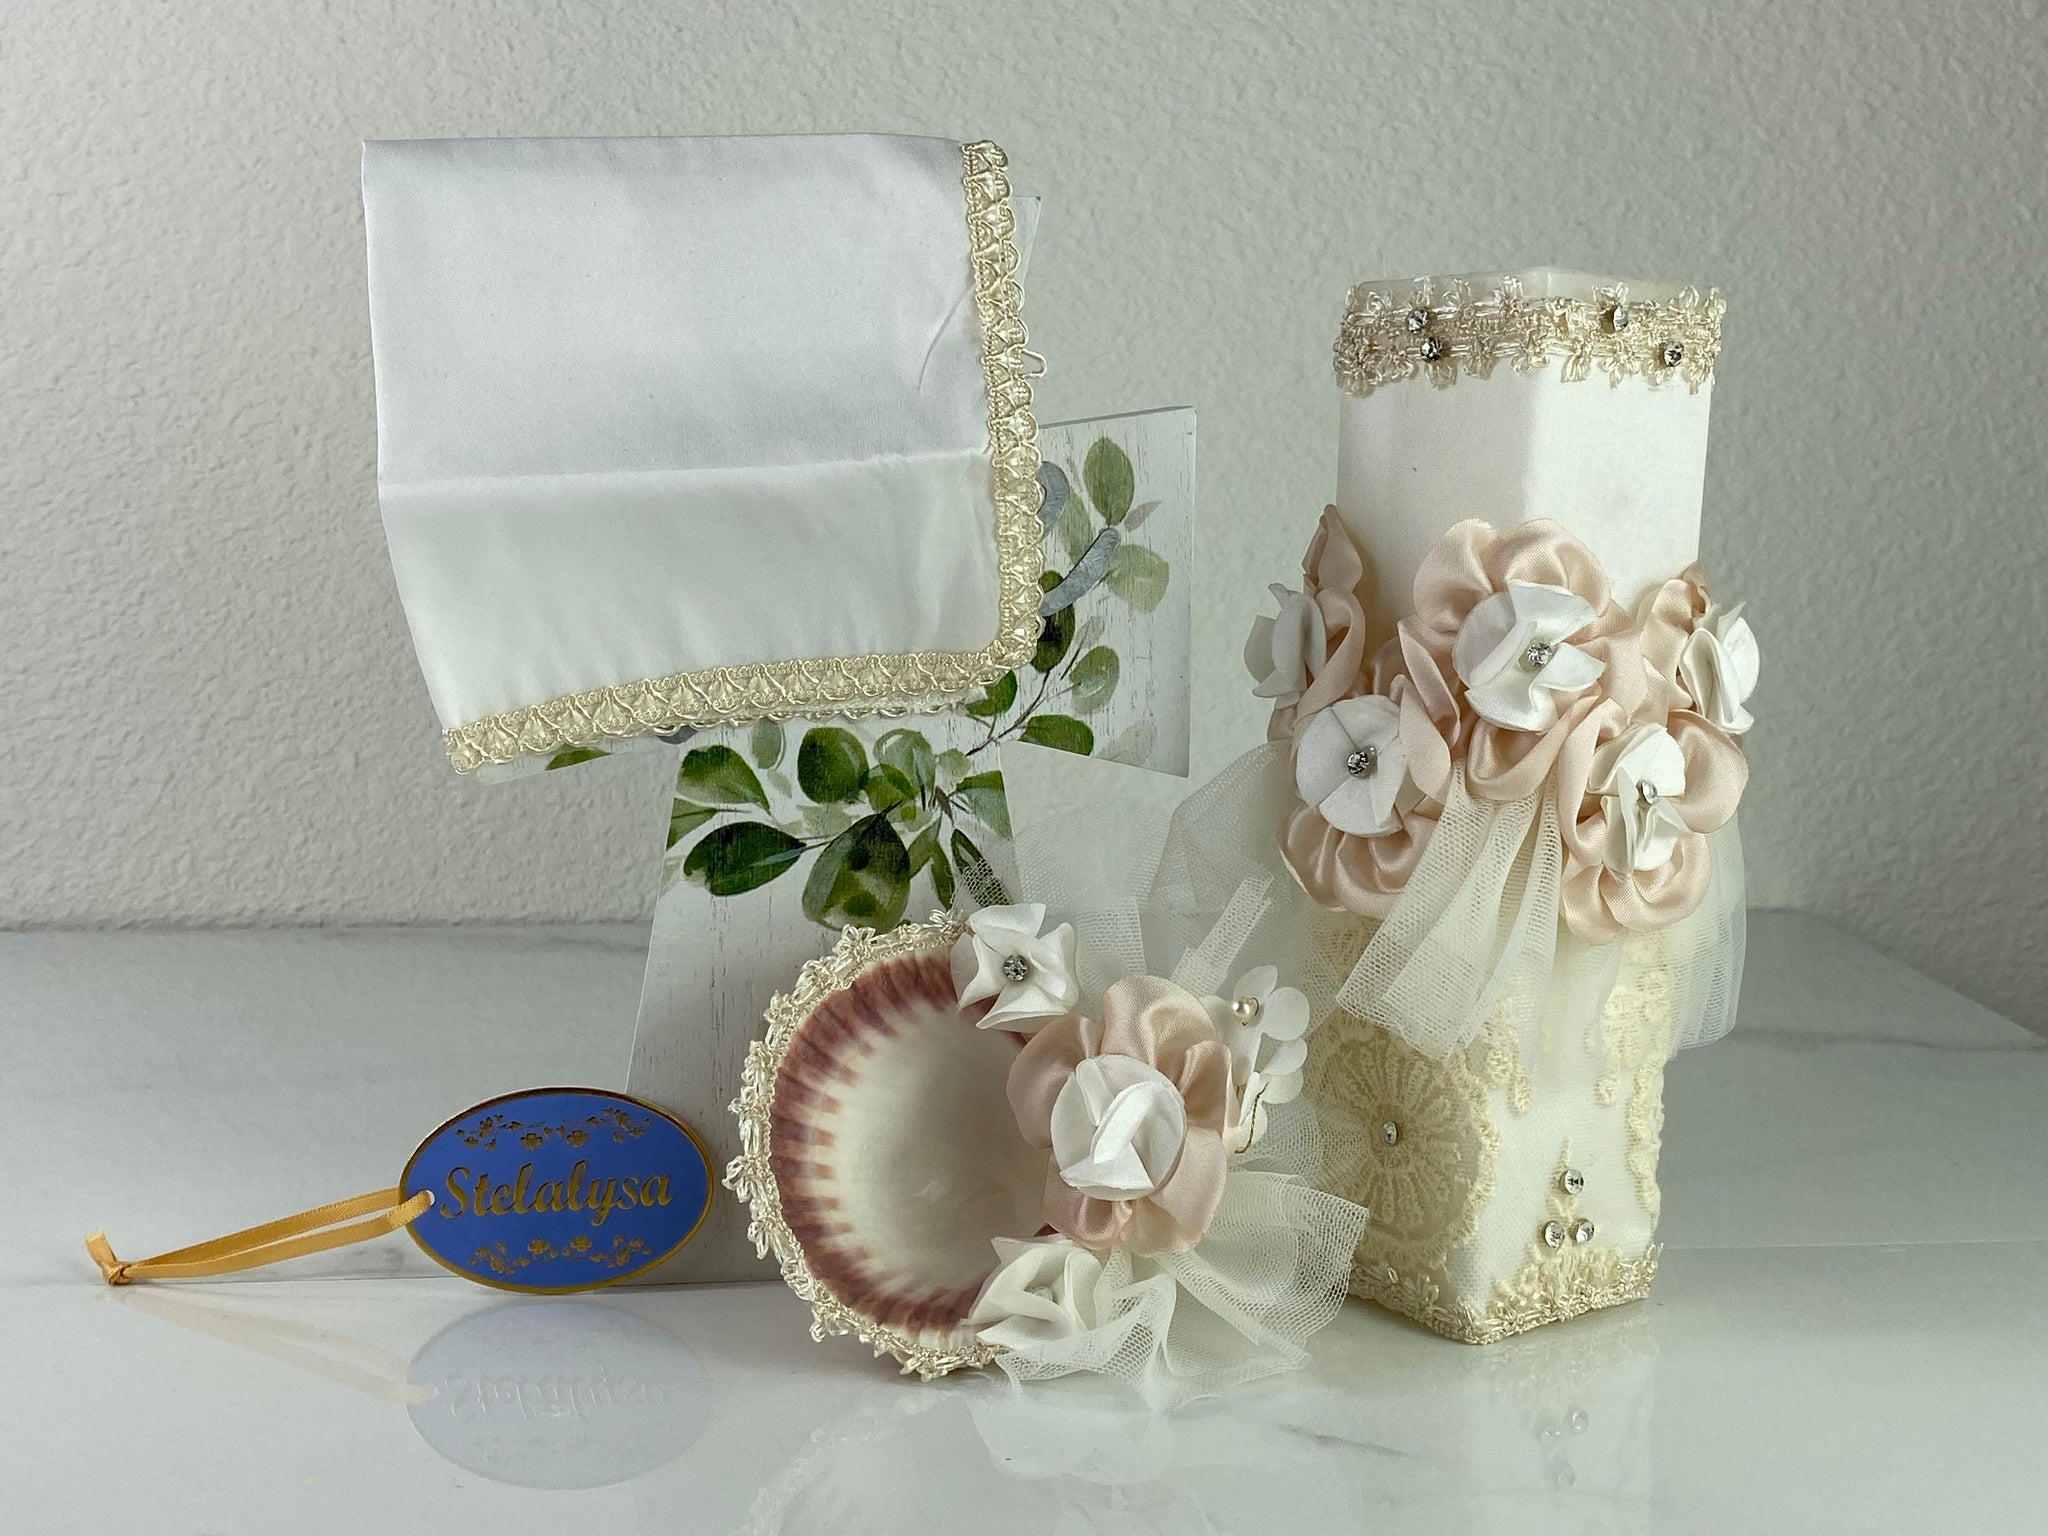 These one of a kind Candle set is handmade and ivory in color.   It is uniquely decorated with pears, crystals, ribbons, bows beads, and stunning embroidered lace making it a gorgeous keepsake.   This candle is rectangular in shape.    To match, the Shell is put together piece by piece to compliment the Candle and Handkerchief.  The Handkerchief is made of satin and embroidered lace to match the Shell and Candle beautifully.  